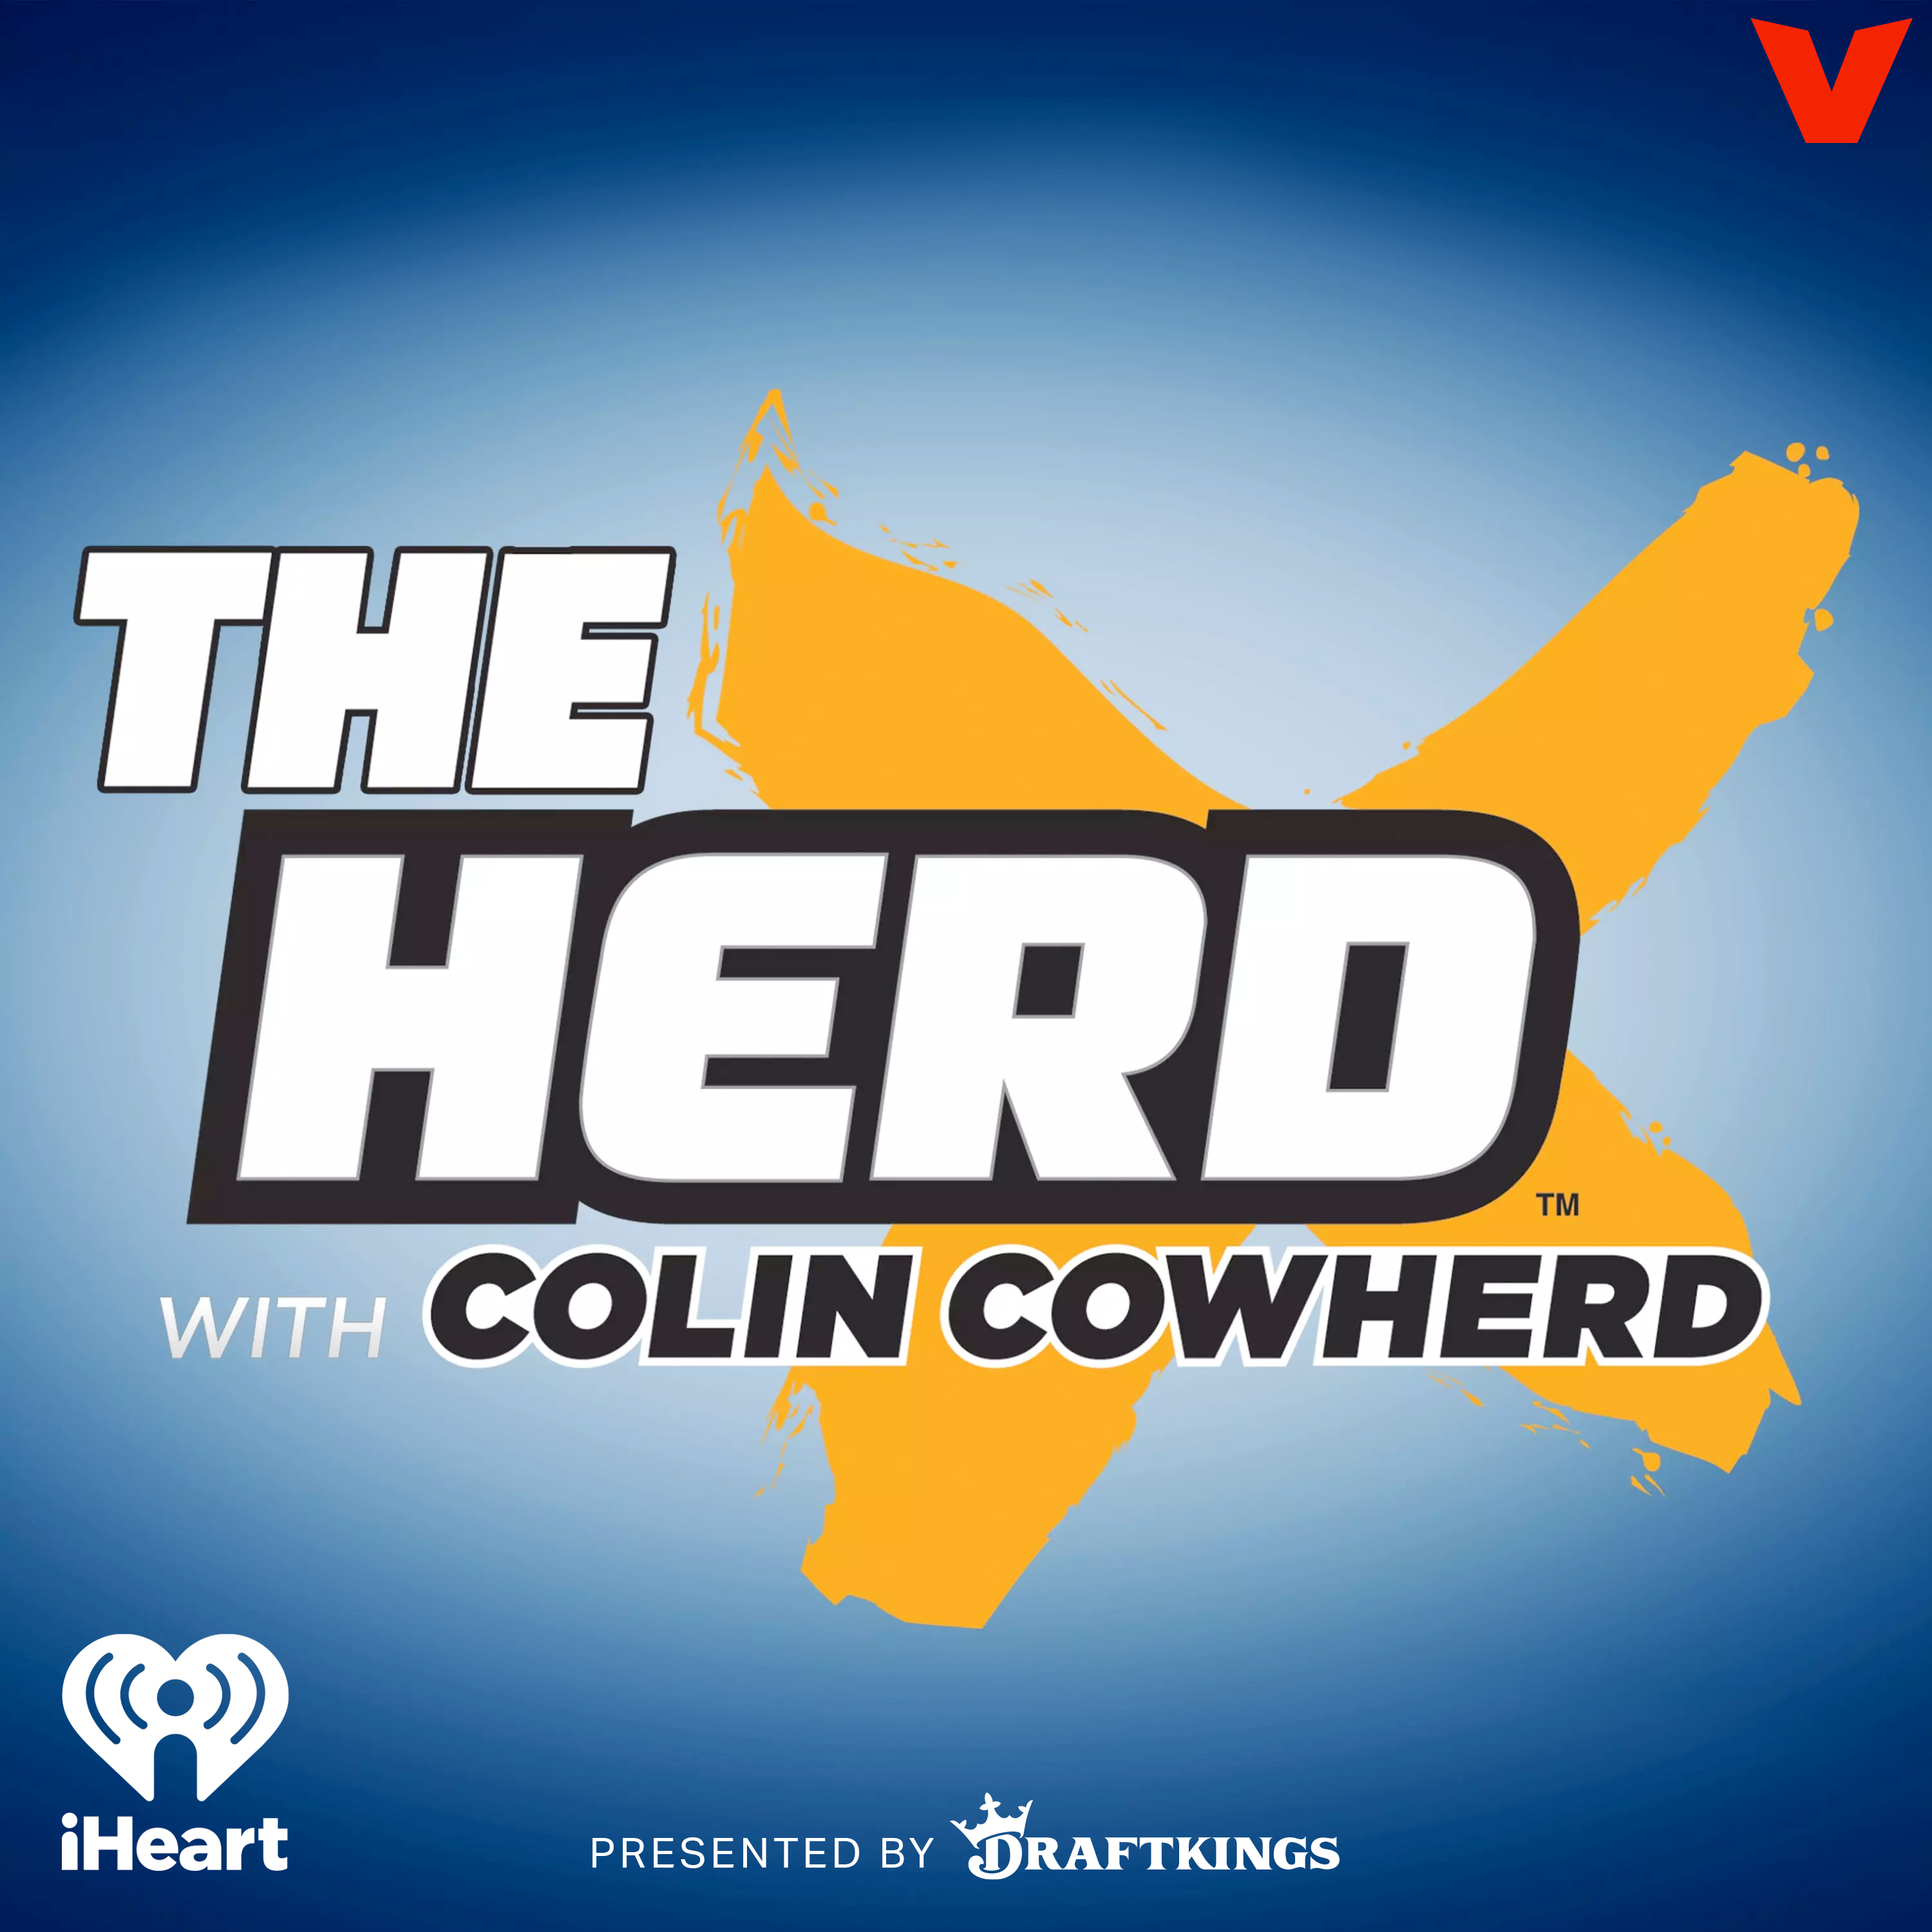 Colin Cowherd Podcast - CFP & Cristobal to The U, Dave Wannstedt on Tua Momentum, Big Ben Succession, Cowboys Achilles Heel